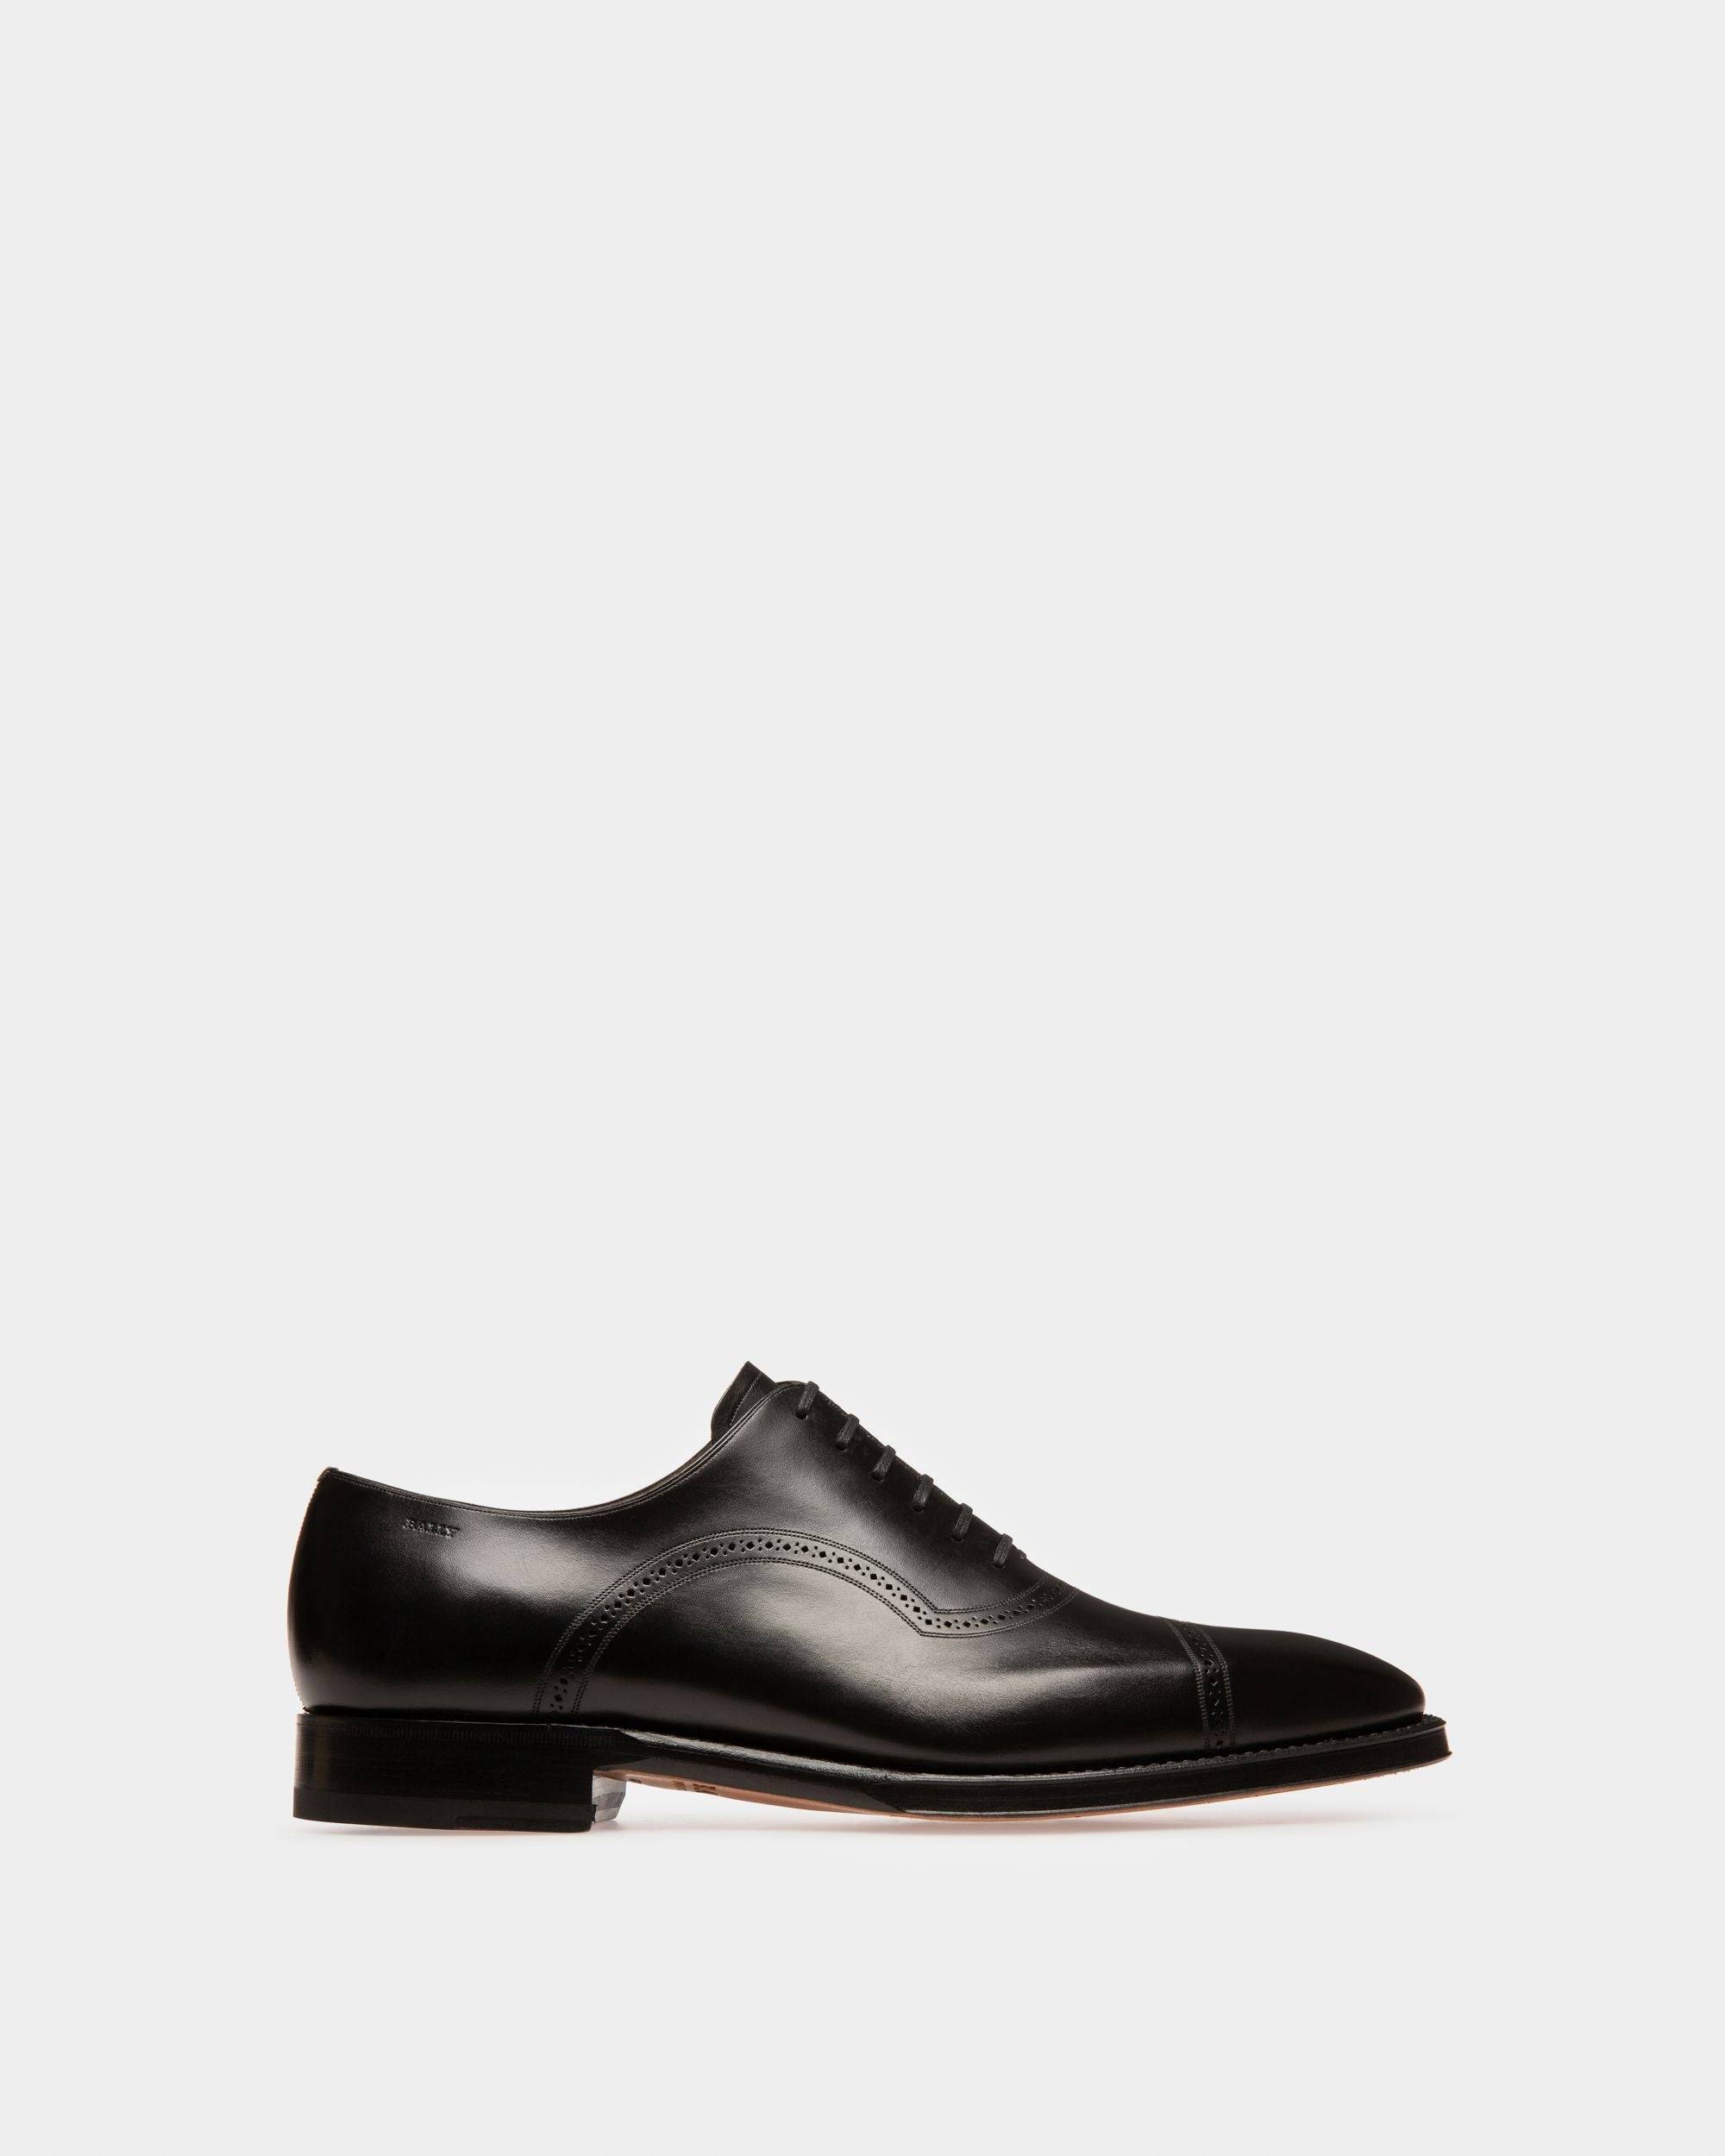 Scanio Men's Leather Oxford Lace-Up Shoe In Black - Herren - Bally